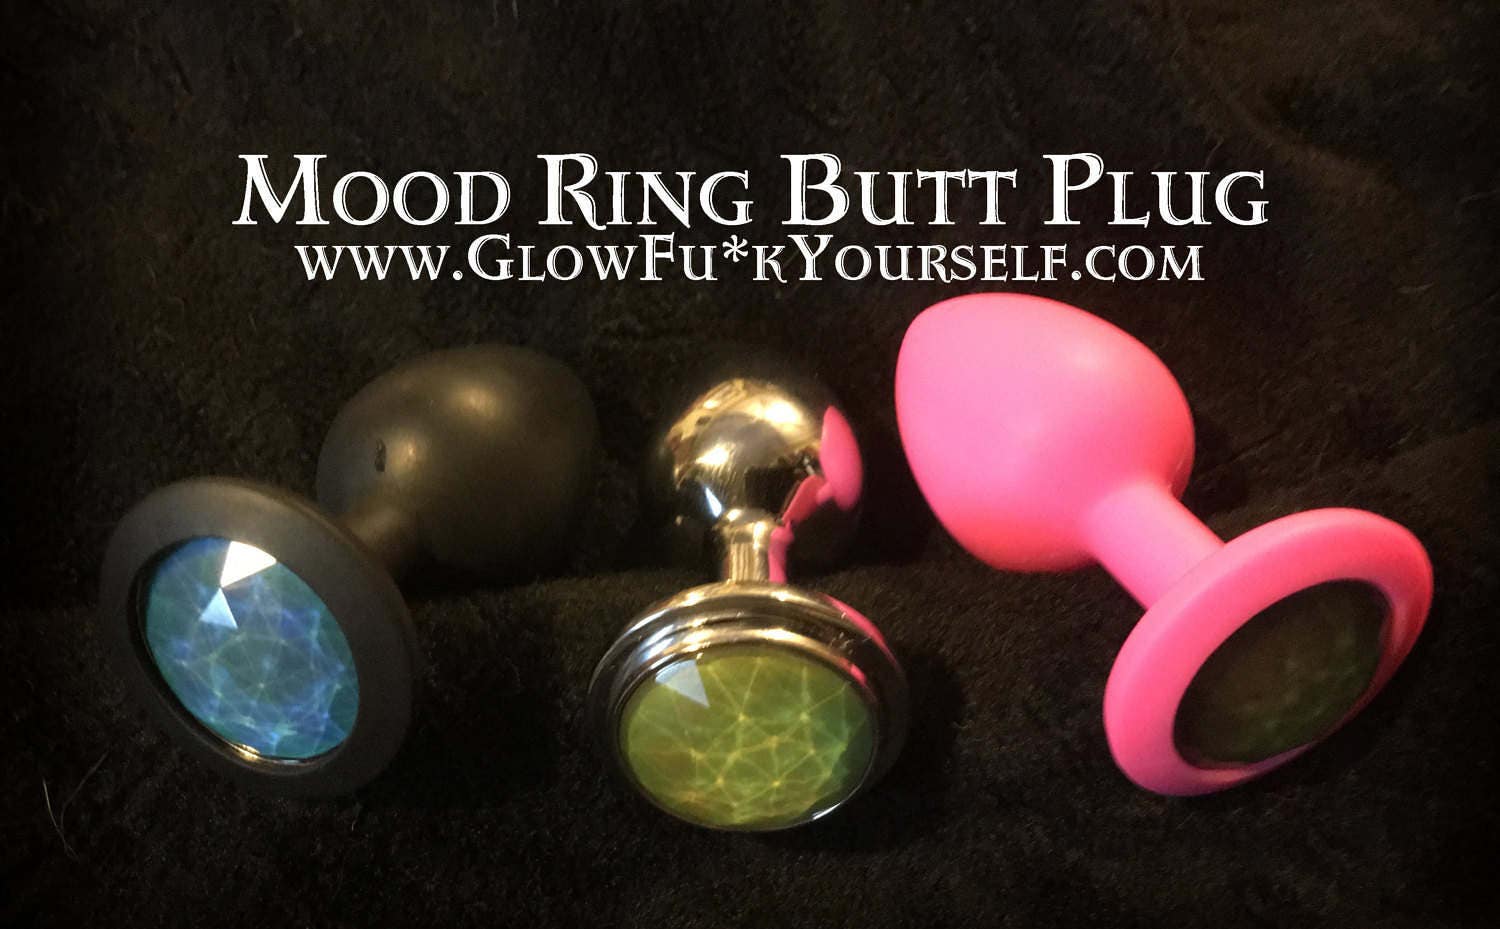 The Of Why Do People Use Butt Plugs? Your Guide To Anal Plugs